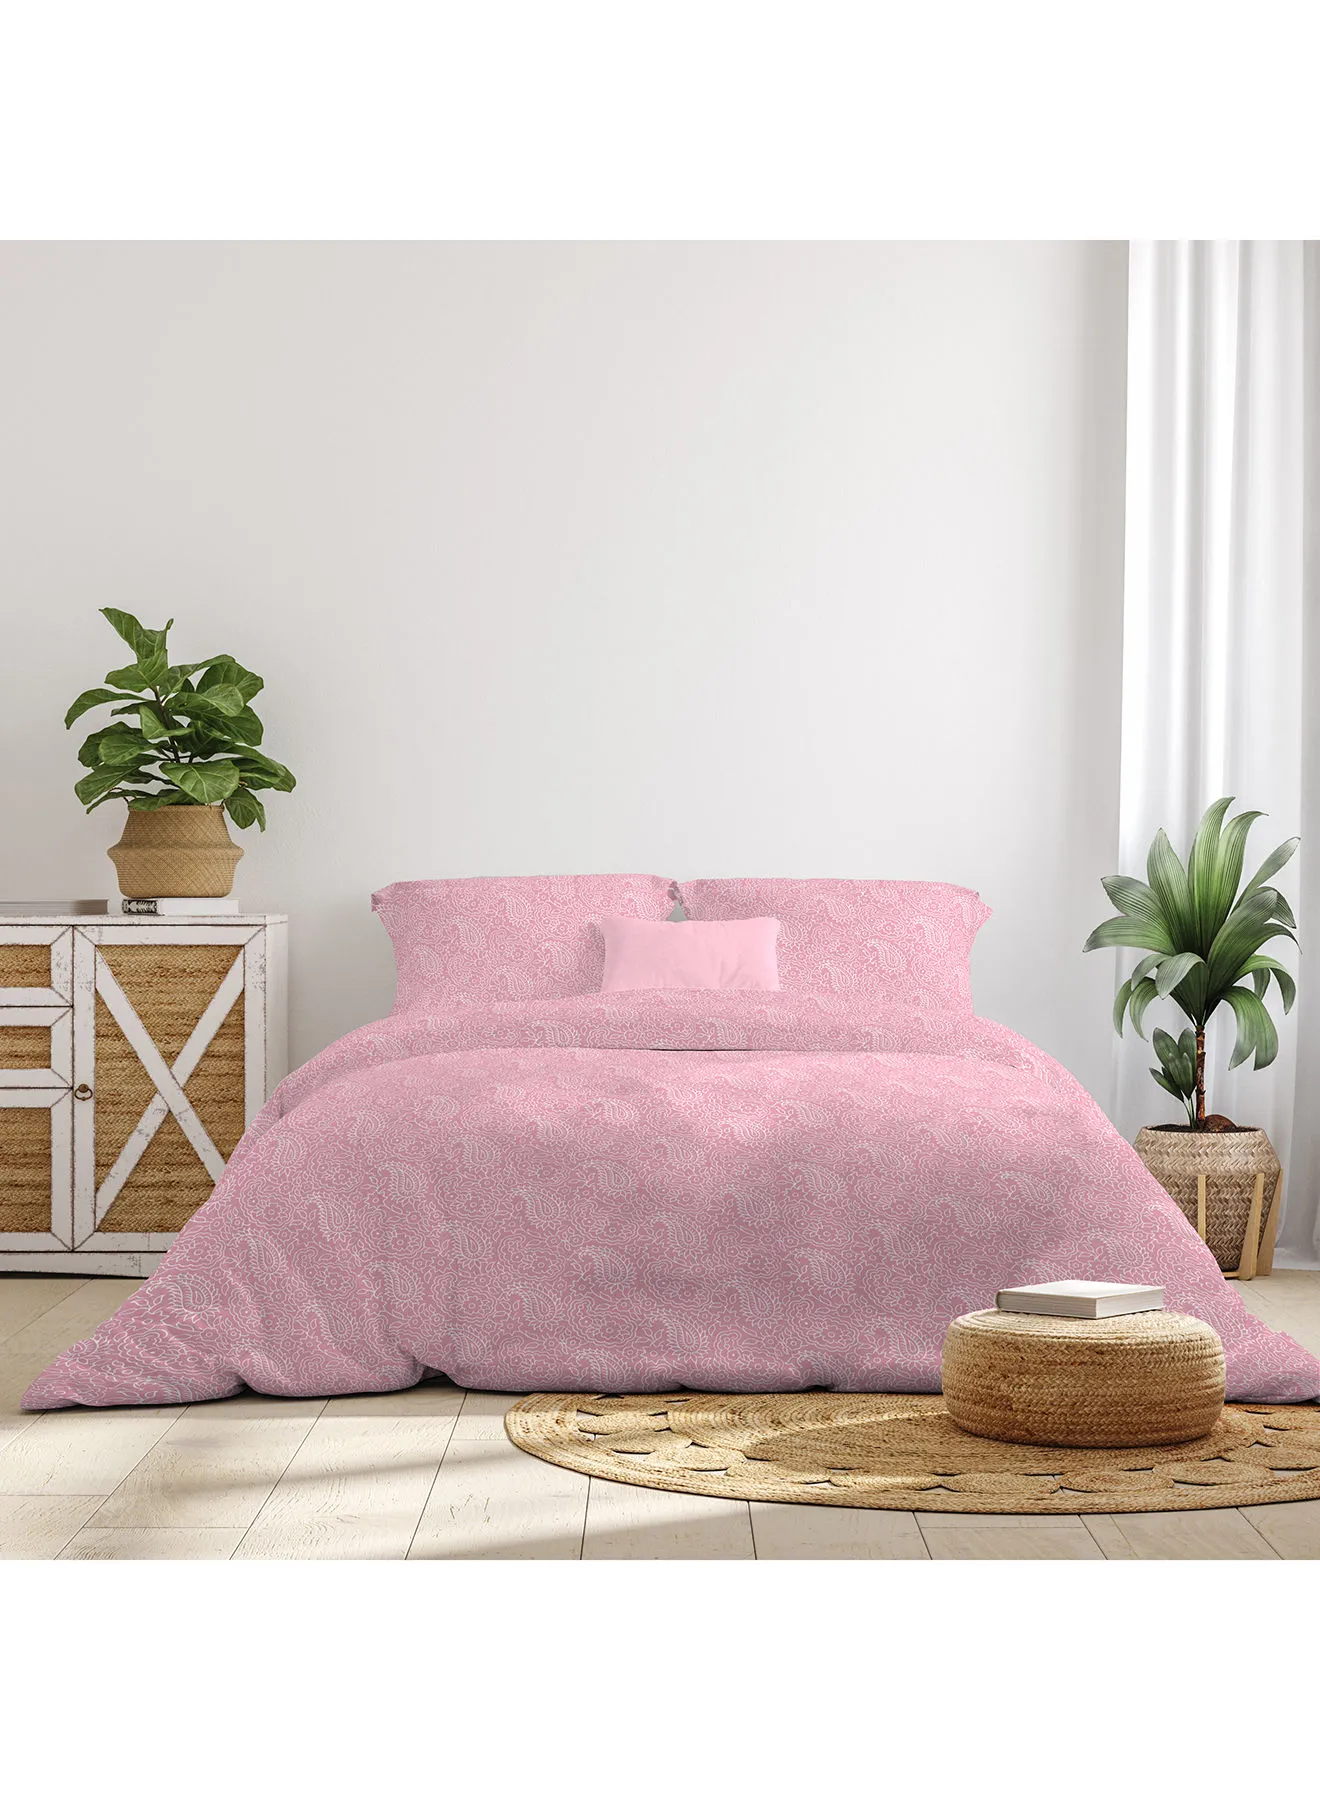 Amal Comforter Set With Pillow Cover 50X75 Cm, Comforter 200X240 Cm - For Queen Size Mattress - 100% Cotton Percale - Sleep Well Lightweight And Warm Bed Linen Cotton Pink Paisley